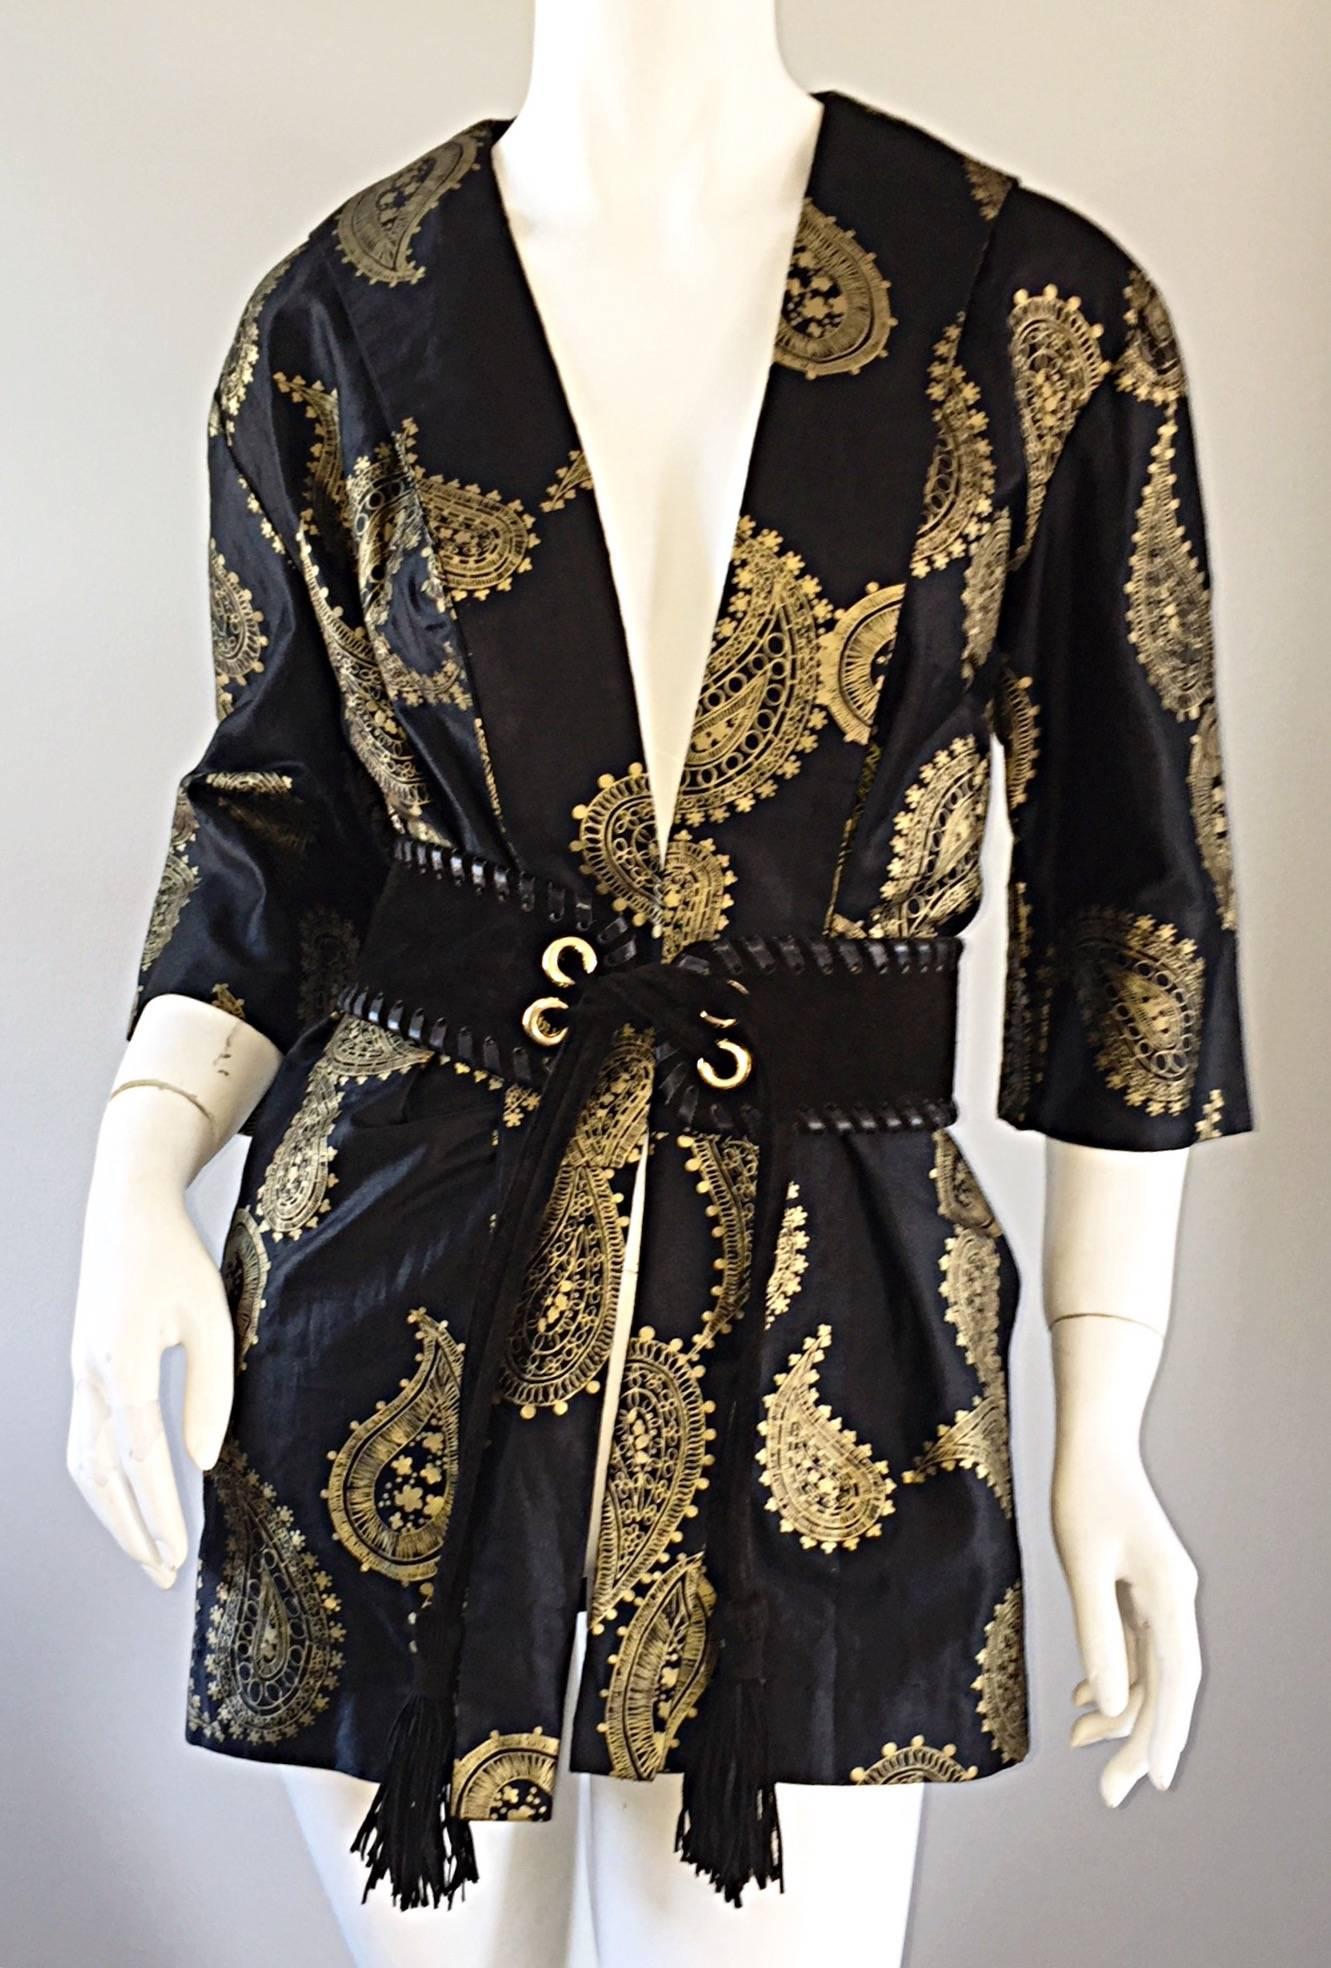 Rare 1950s Alfred Shaheen Vintage 50s Black And Gold Hand Printed Kimono Jacket 2